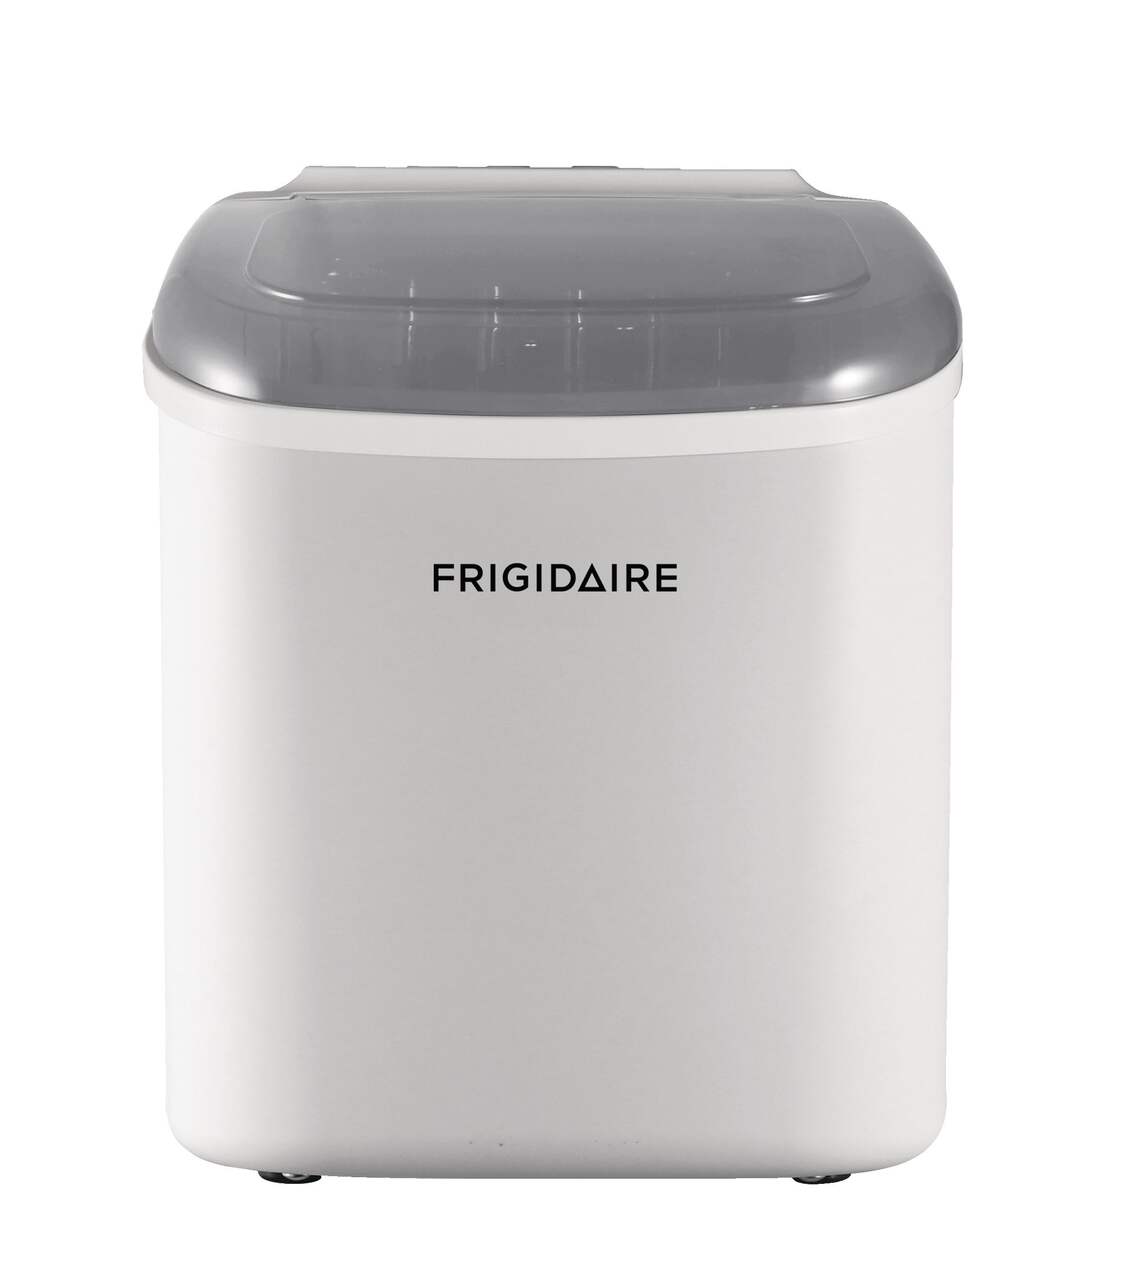 https://media-www.canadiantire.ca/product/living/kitchen/white-goods/4990110/frigidaire-26lbs-ice-maker-32415c08-c7e3-44ed-9baa-a9279d53d1d6-jpgrendition.jpg?imdensity=1&imwidth=640&impolicy=mZoom